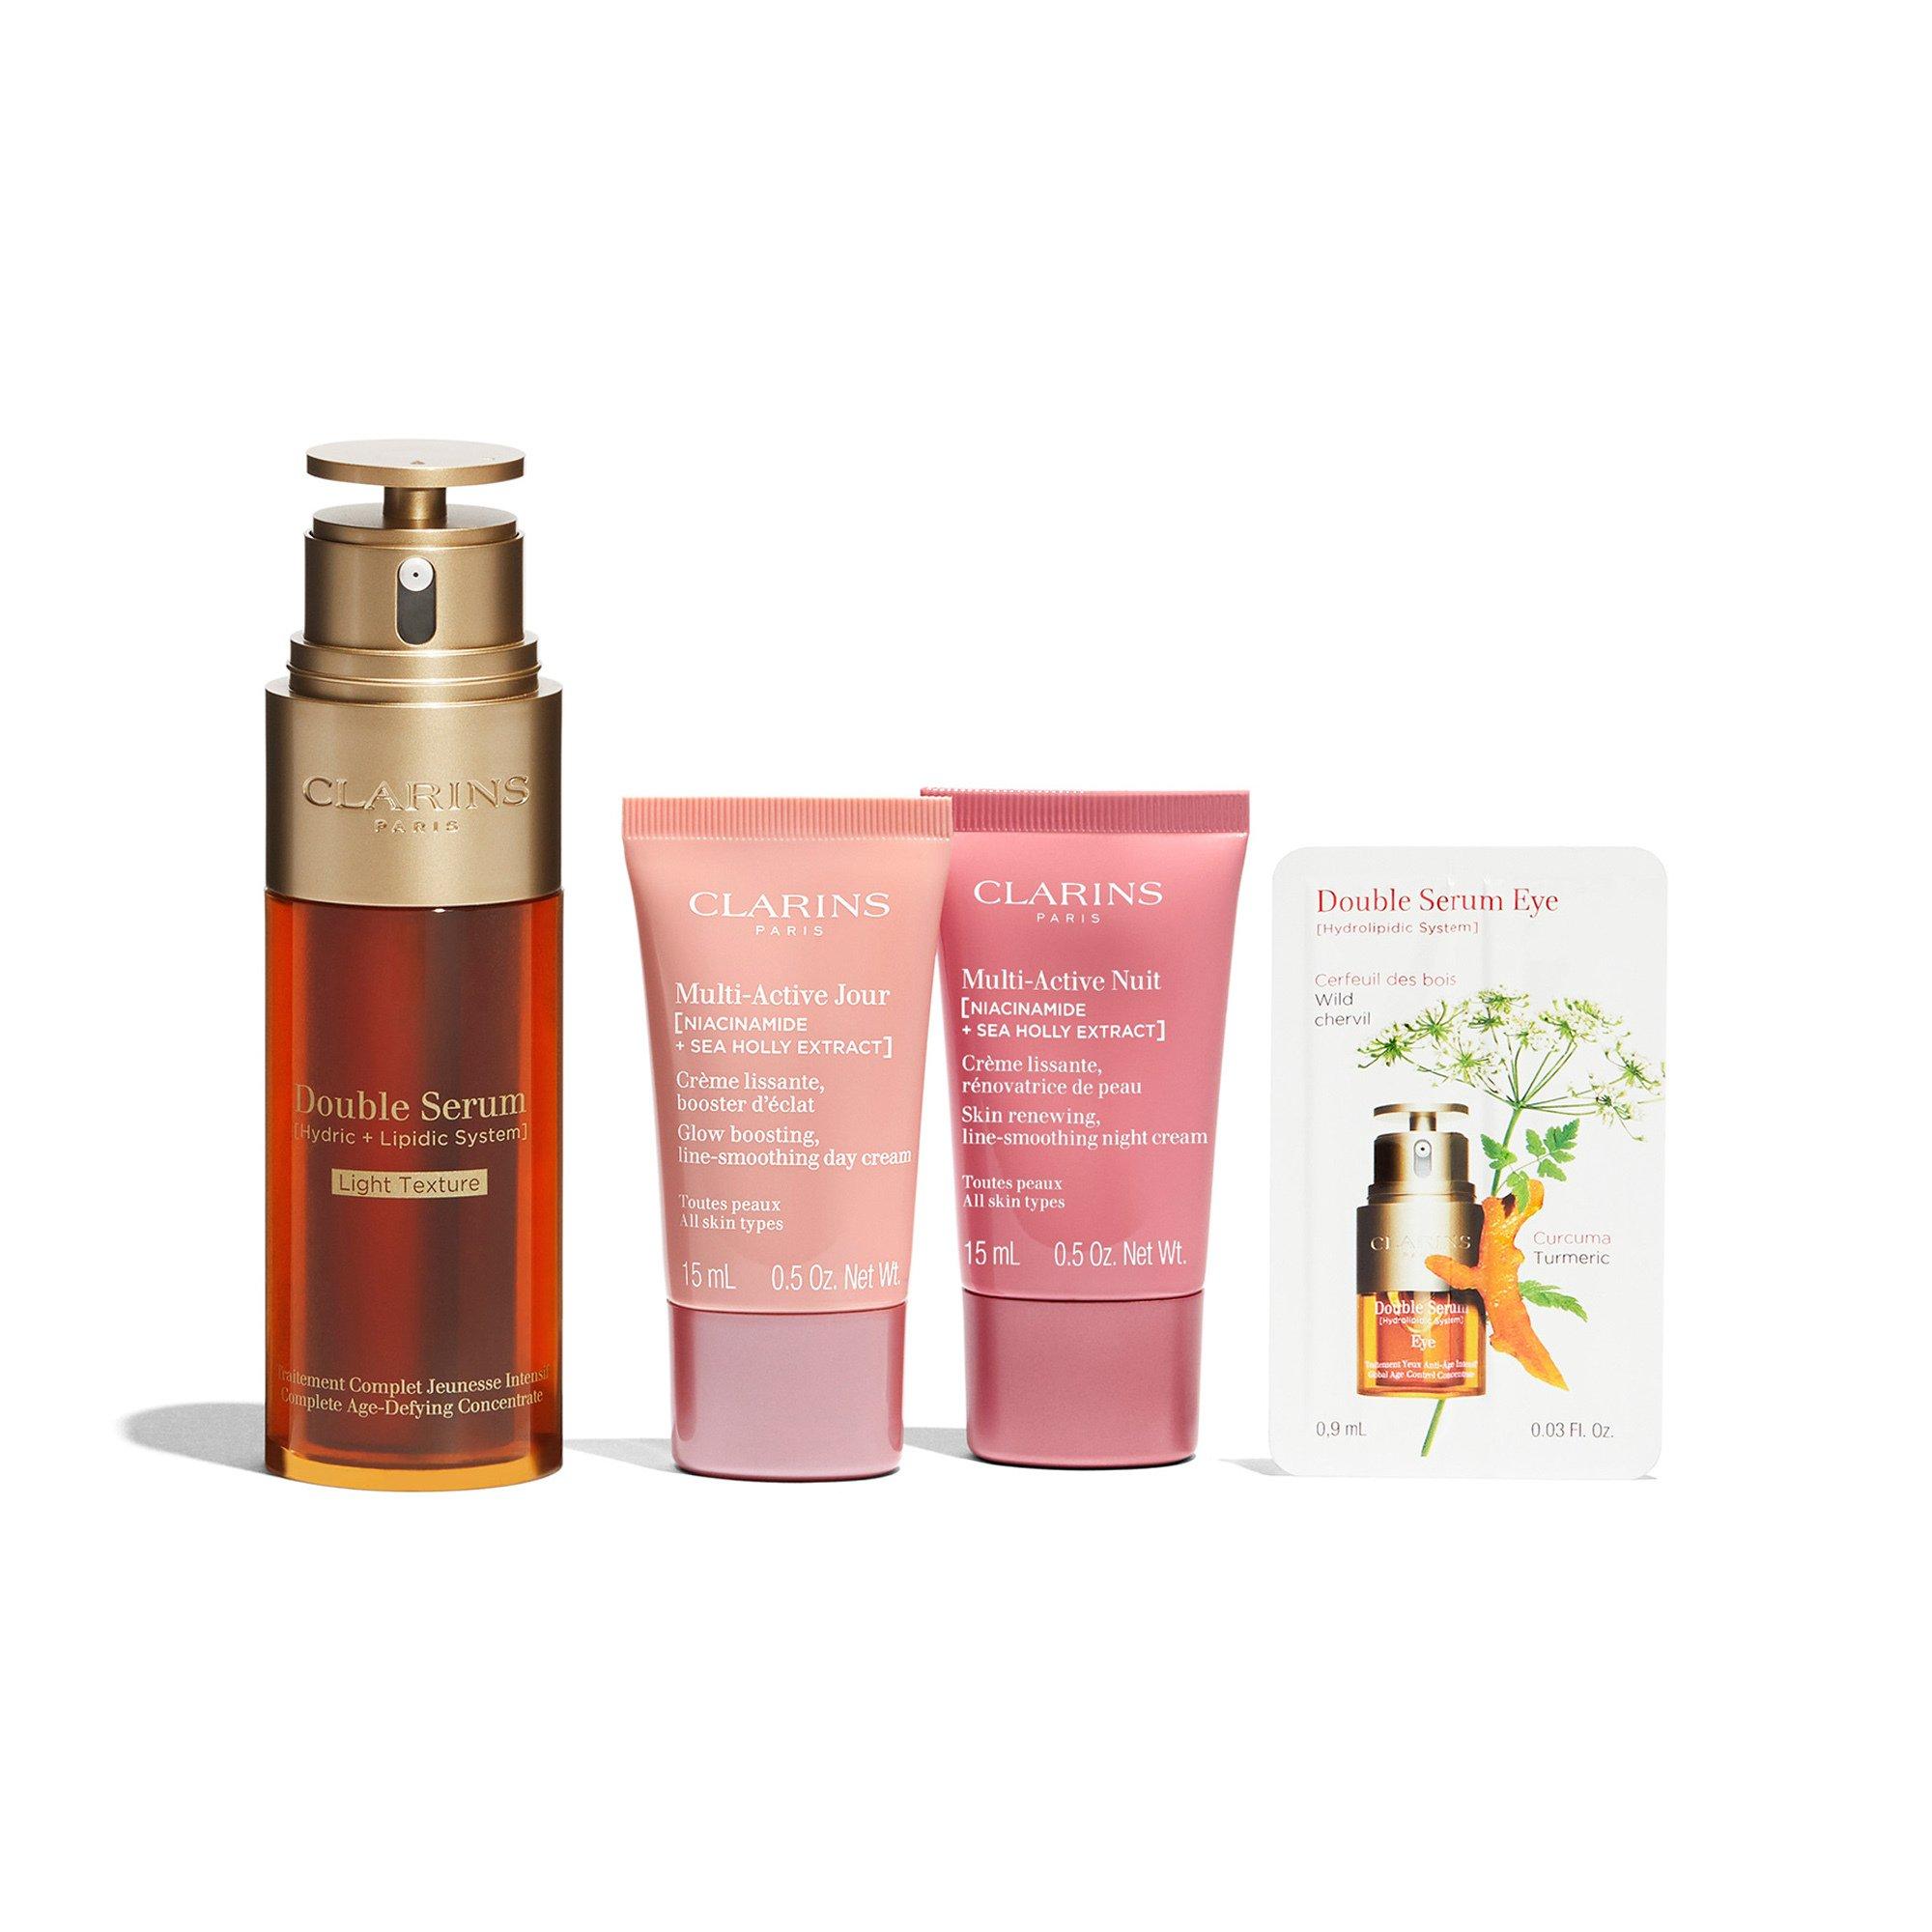 CLARINS  Double Serum & Multi-Active Programme anti-âge 